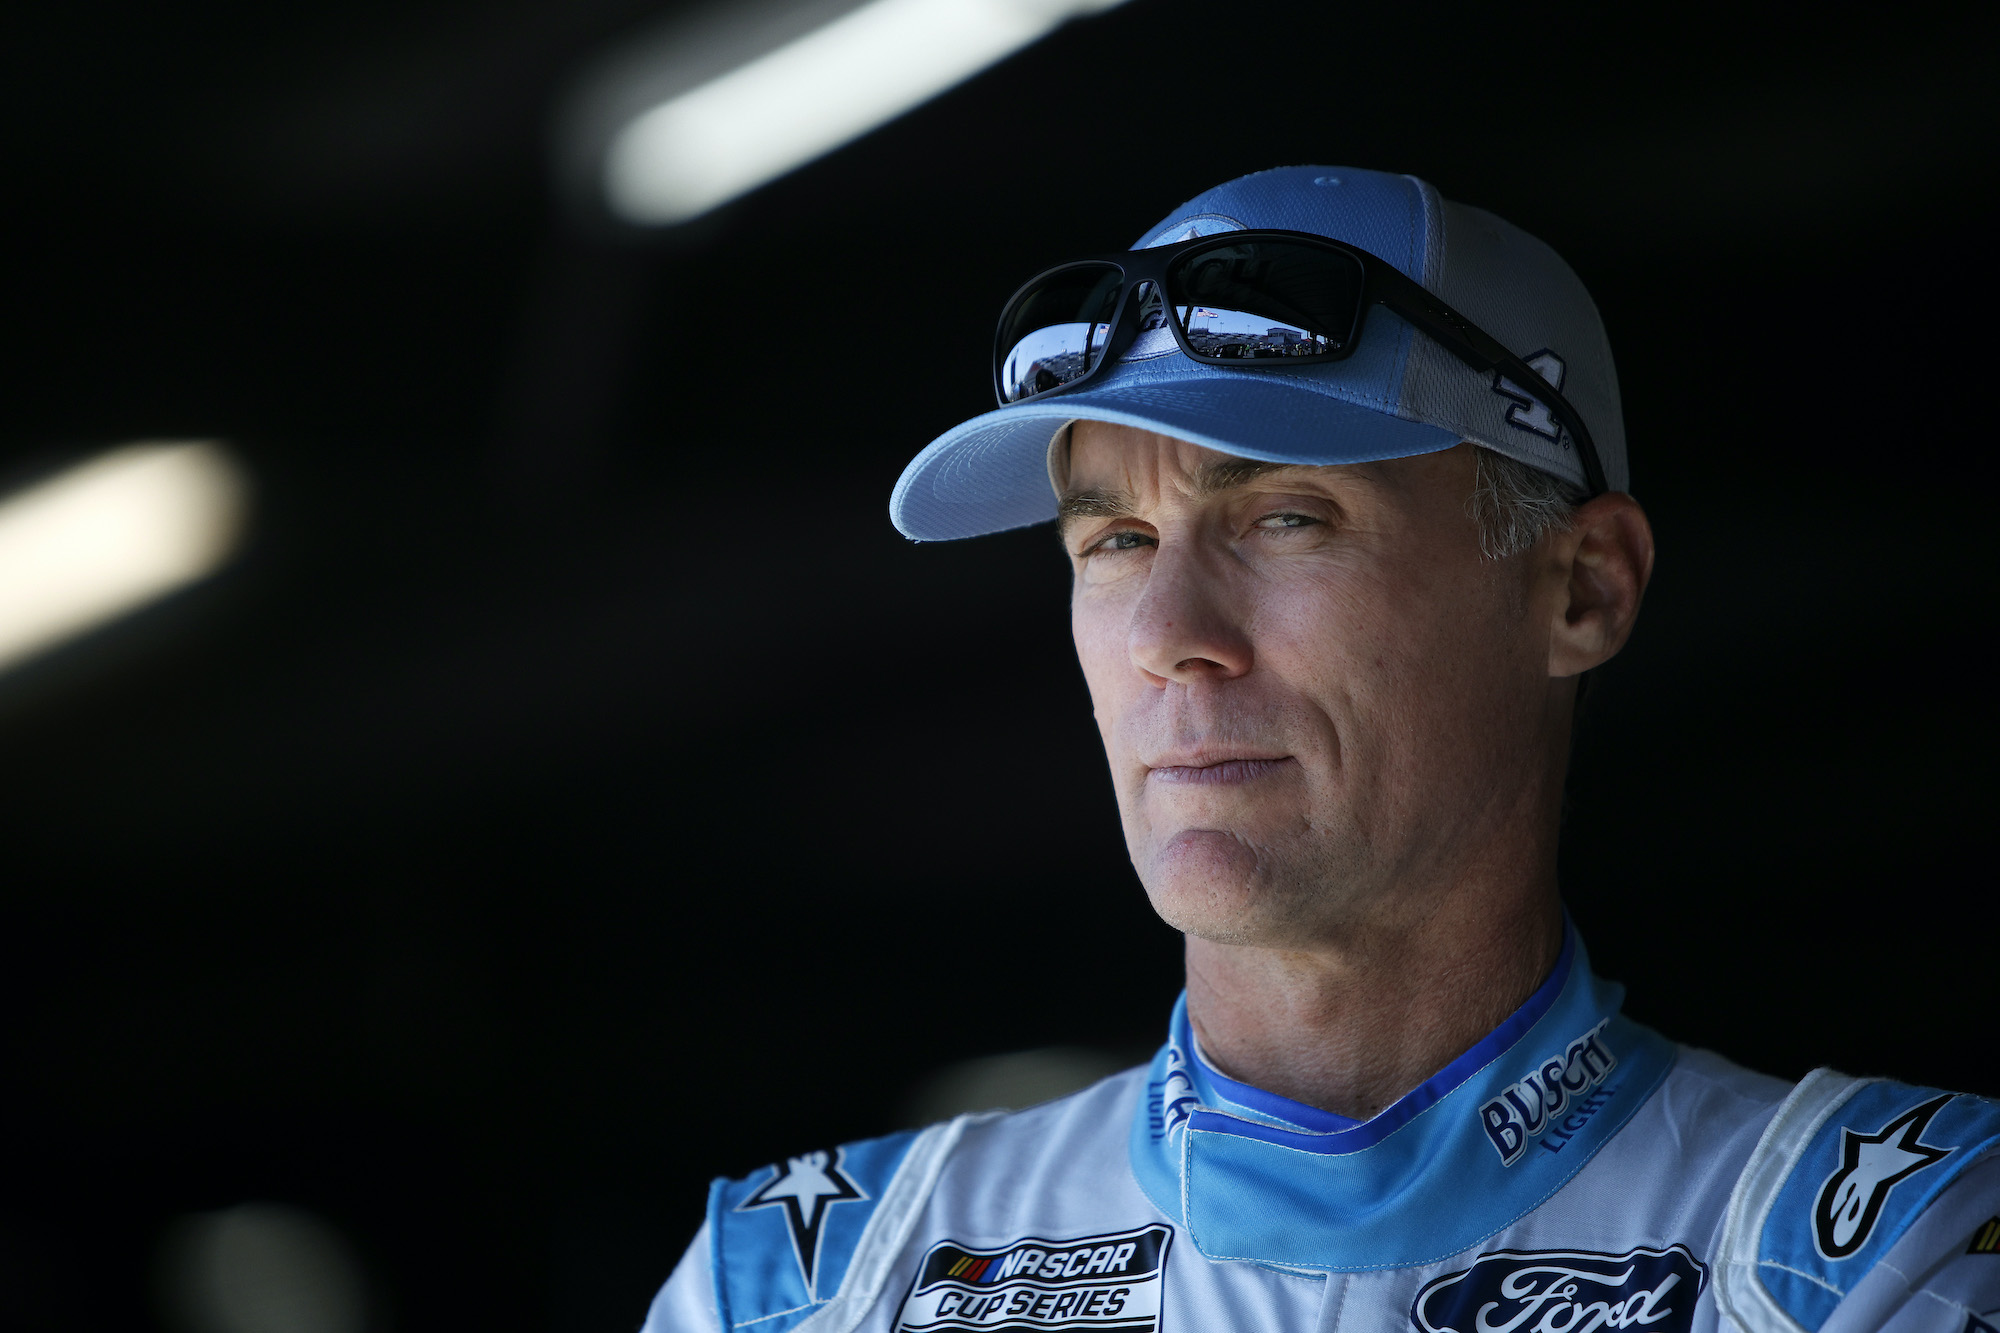 Kevin Harvick Won’t Be Concerned About Consequences and Likely Seeking to Pay Back Some Drivers in 2023, According to Fox NASCAR Analyst 